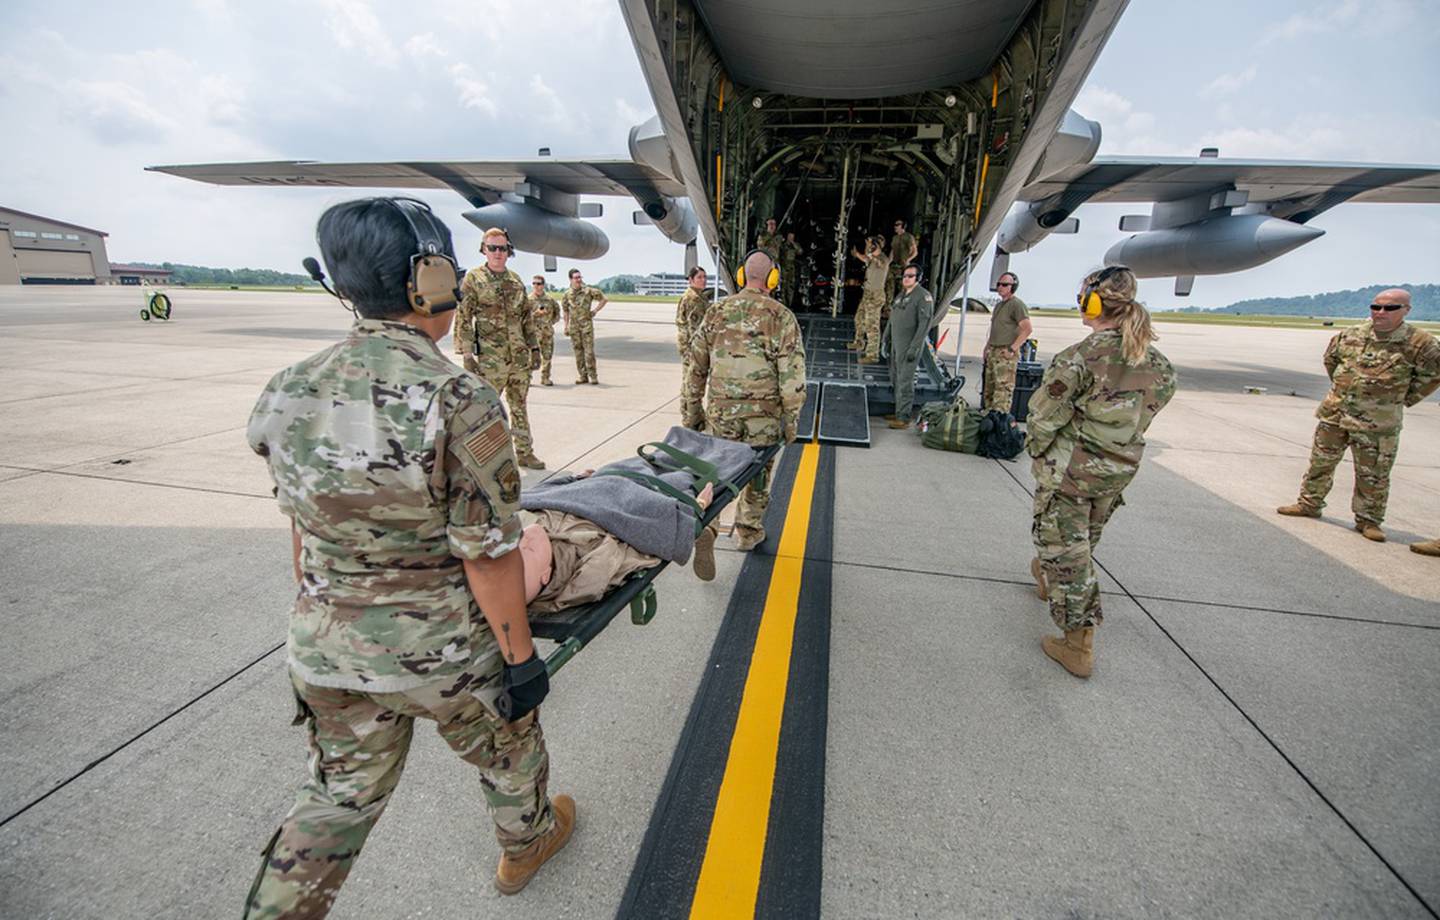 Members of the 130th Airlift Wing perform aeromedical evacuation drills as part of the week-long joint training exercise Sentry Storm at McLaughlin Air National Guard Base in Charleston, West Virginia, July 21, 2021. (Edwin L. Wriston/Army National Guard)